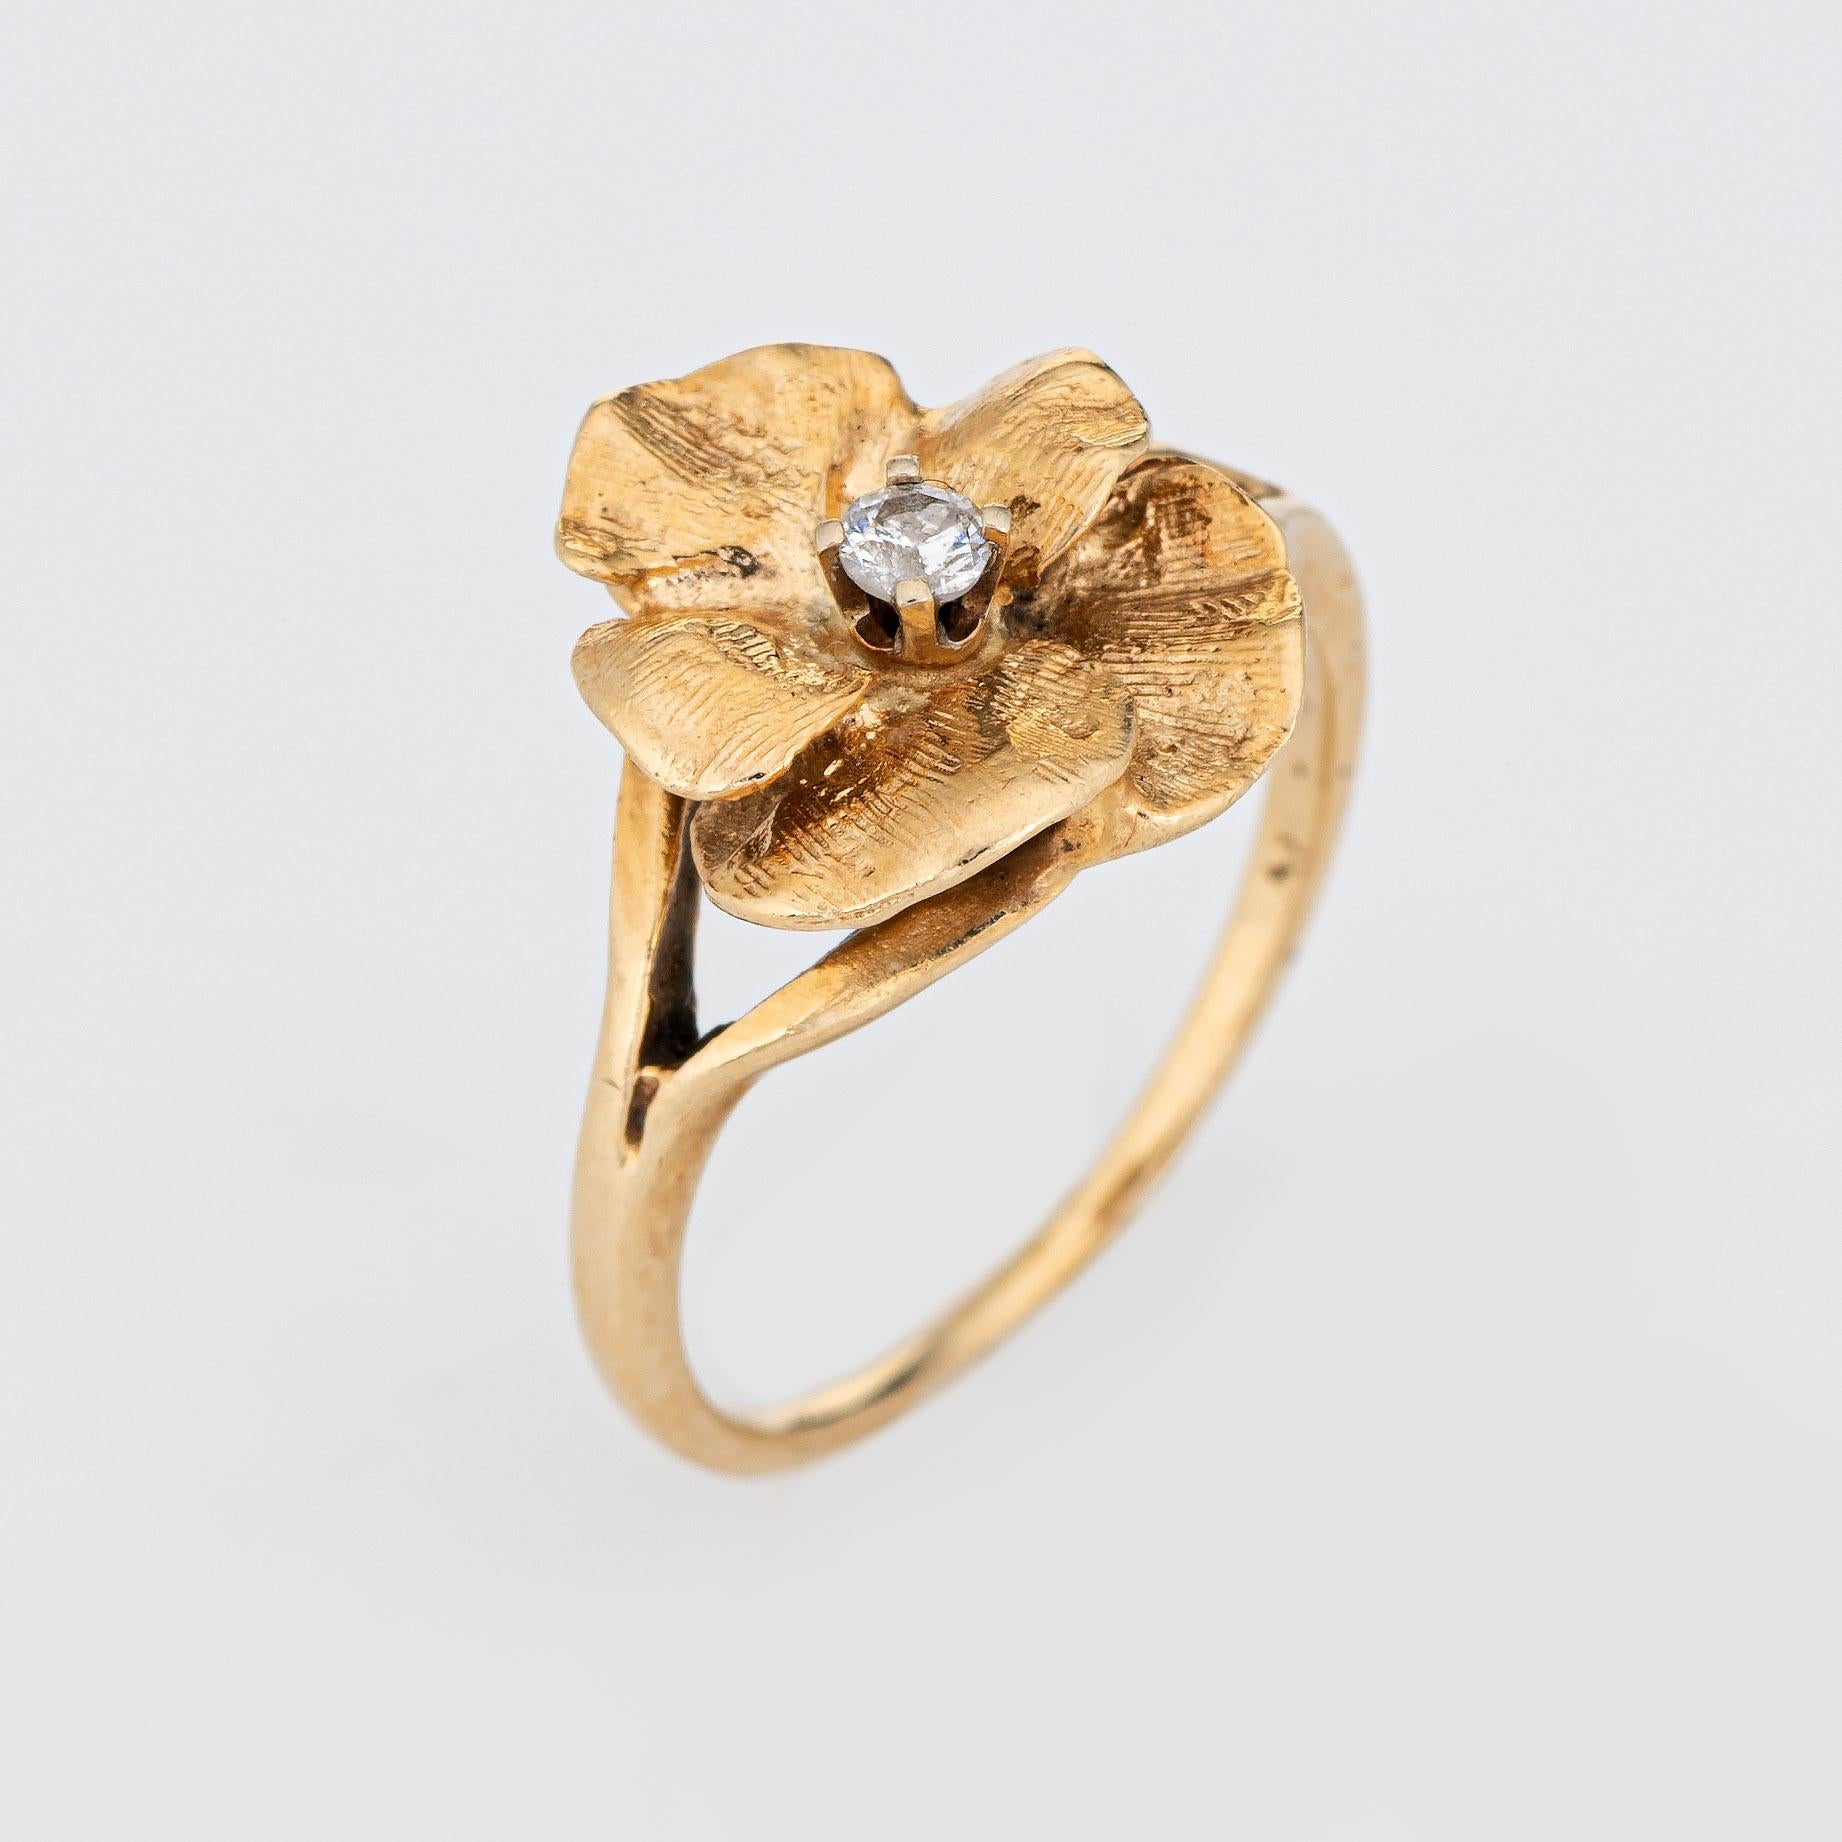 Stylish vintage diamond pansy ring (circa 1960s to 1970s) crafted in 14 karat yellow gold. 

One estimated 0.05 carat diamond is set into the mount (estimated at H-I color and I2 clarity). 

The sweet pansy features a muted brushed gold effect with